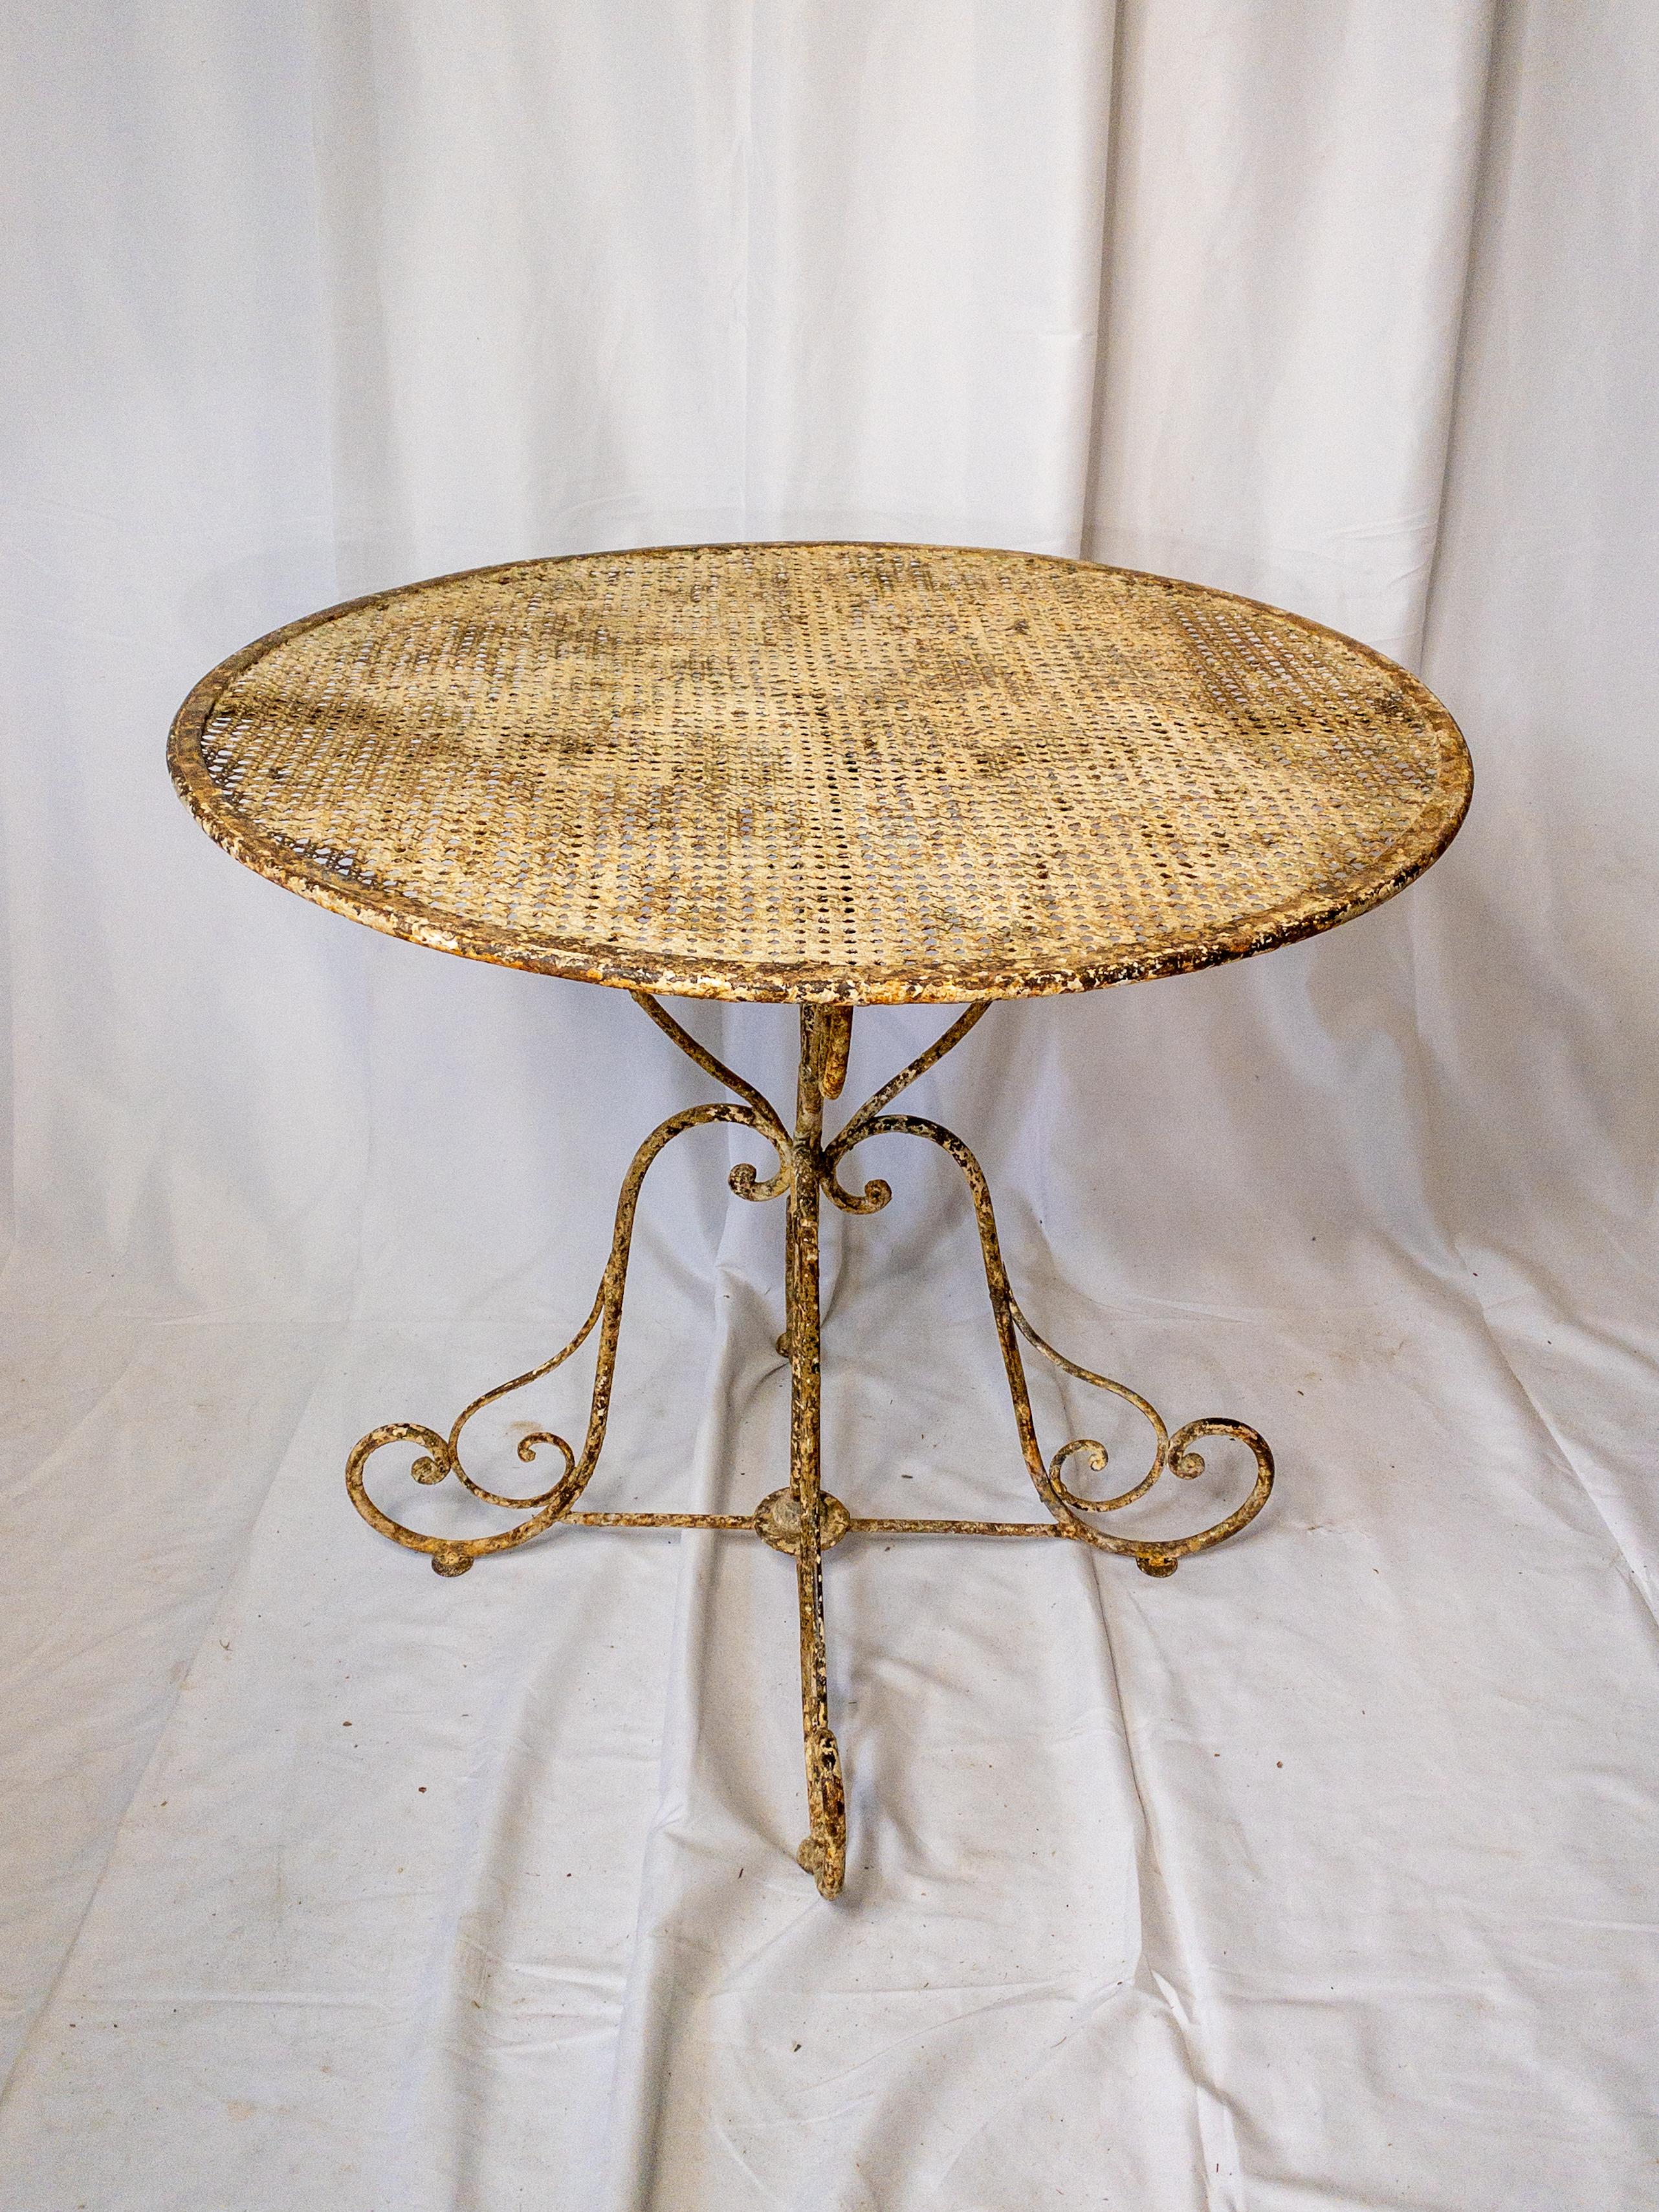 French Napoleon III Period Wrought Iron Garden Table For Sale 4